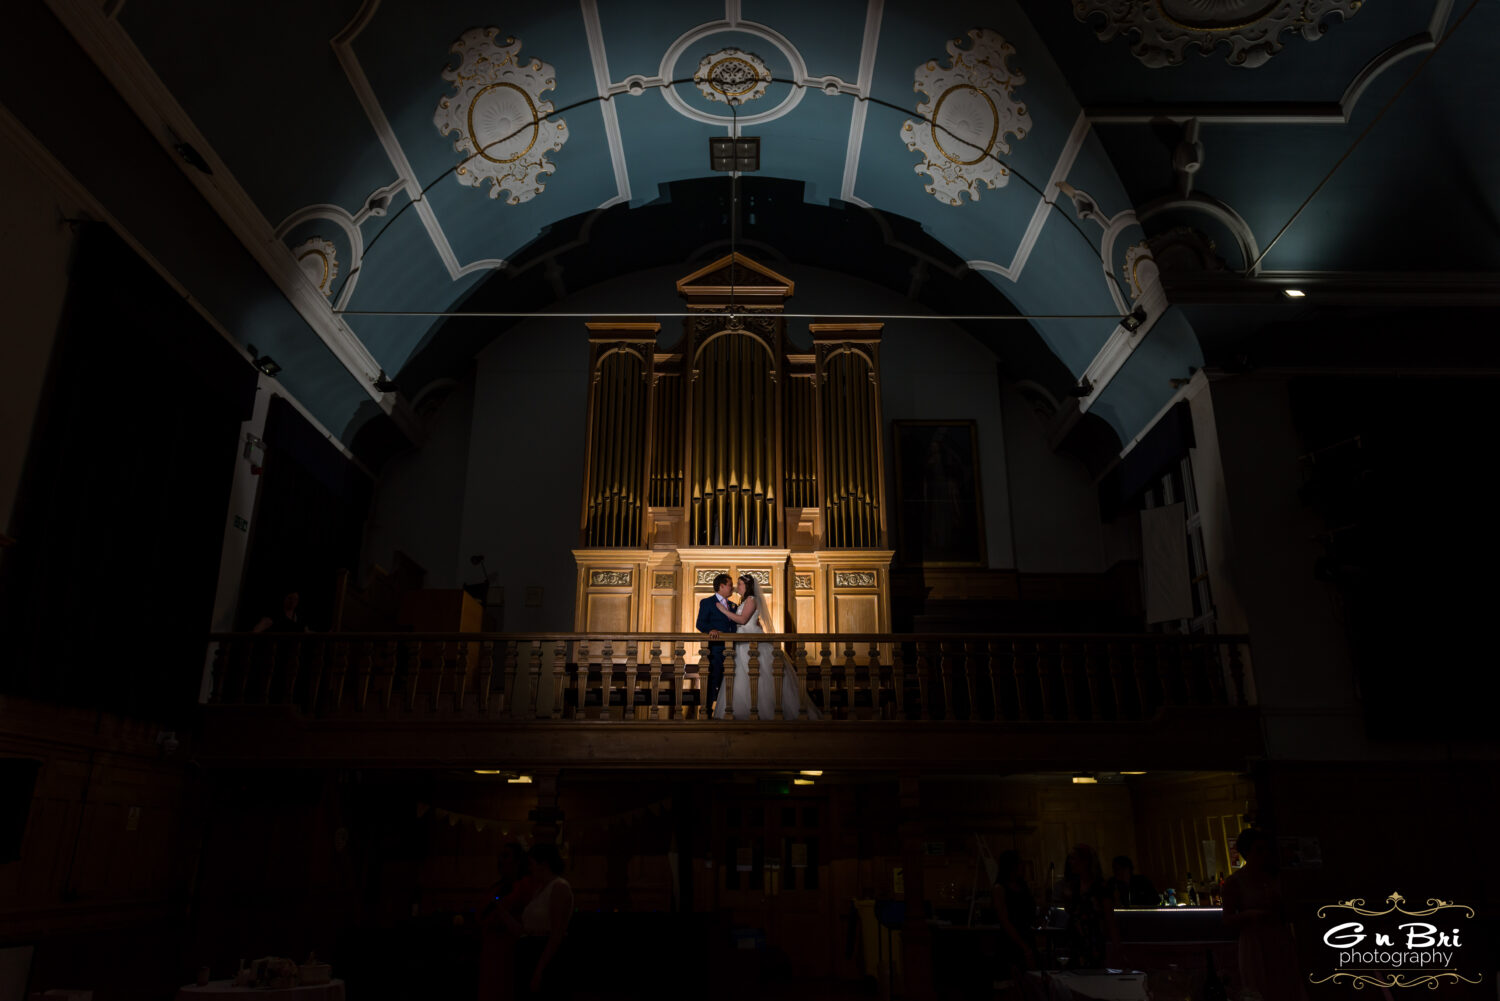 Photos © 2019 GnBri Photography taken throughout Heather and Tom's Wedding day in The Grand Hall, Bedford, Bedfordshire, England on May 25 2019.